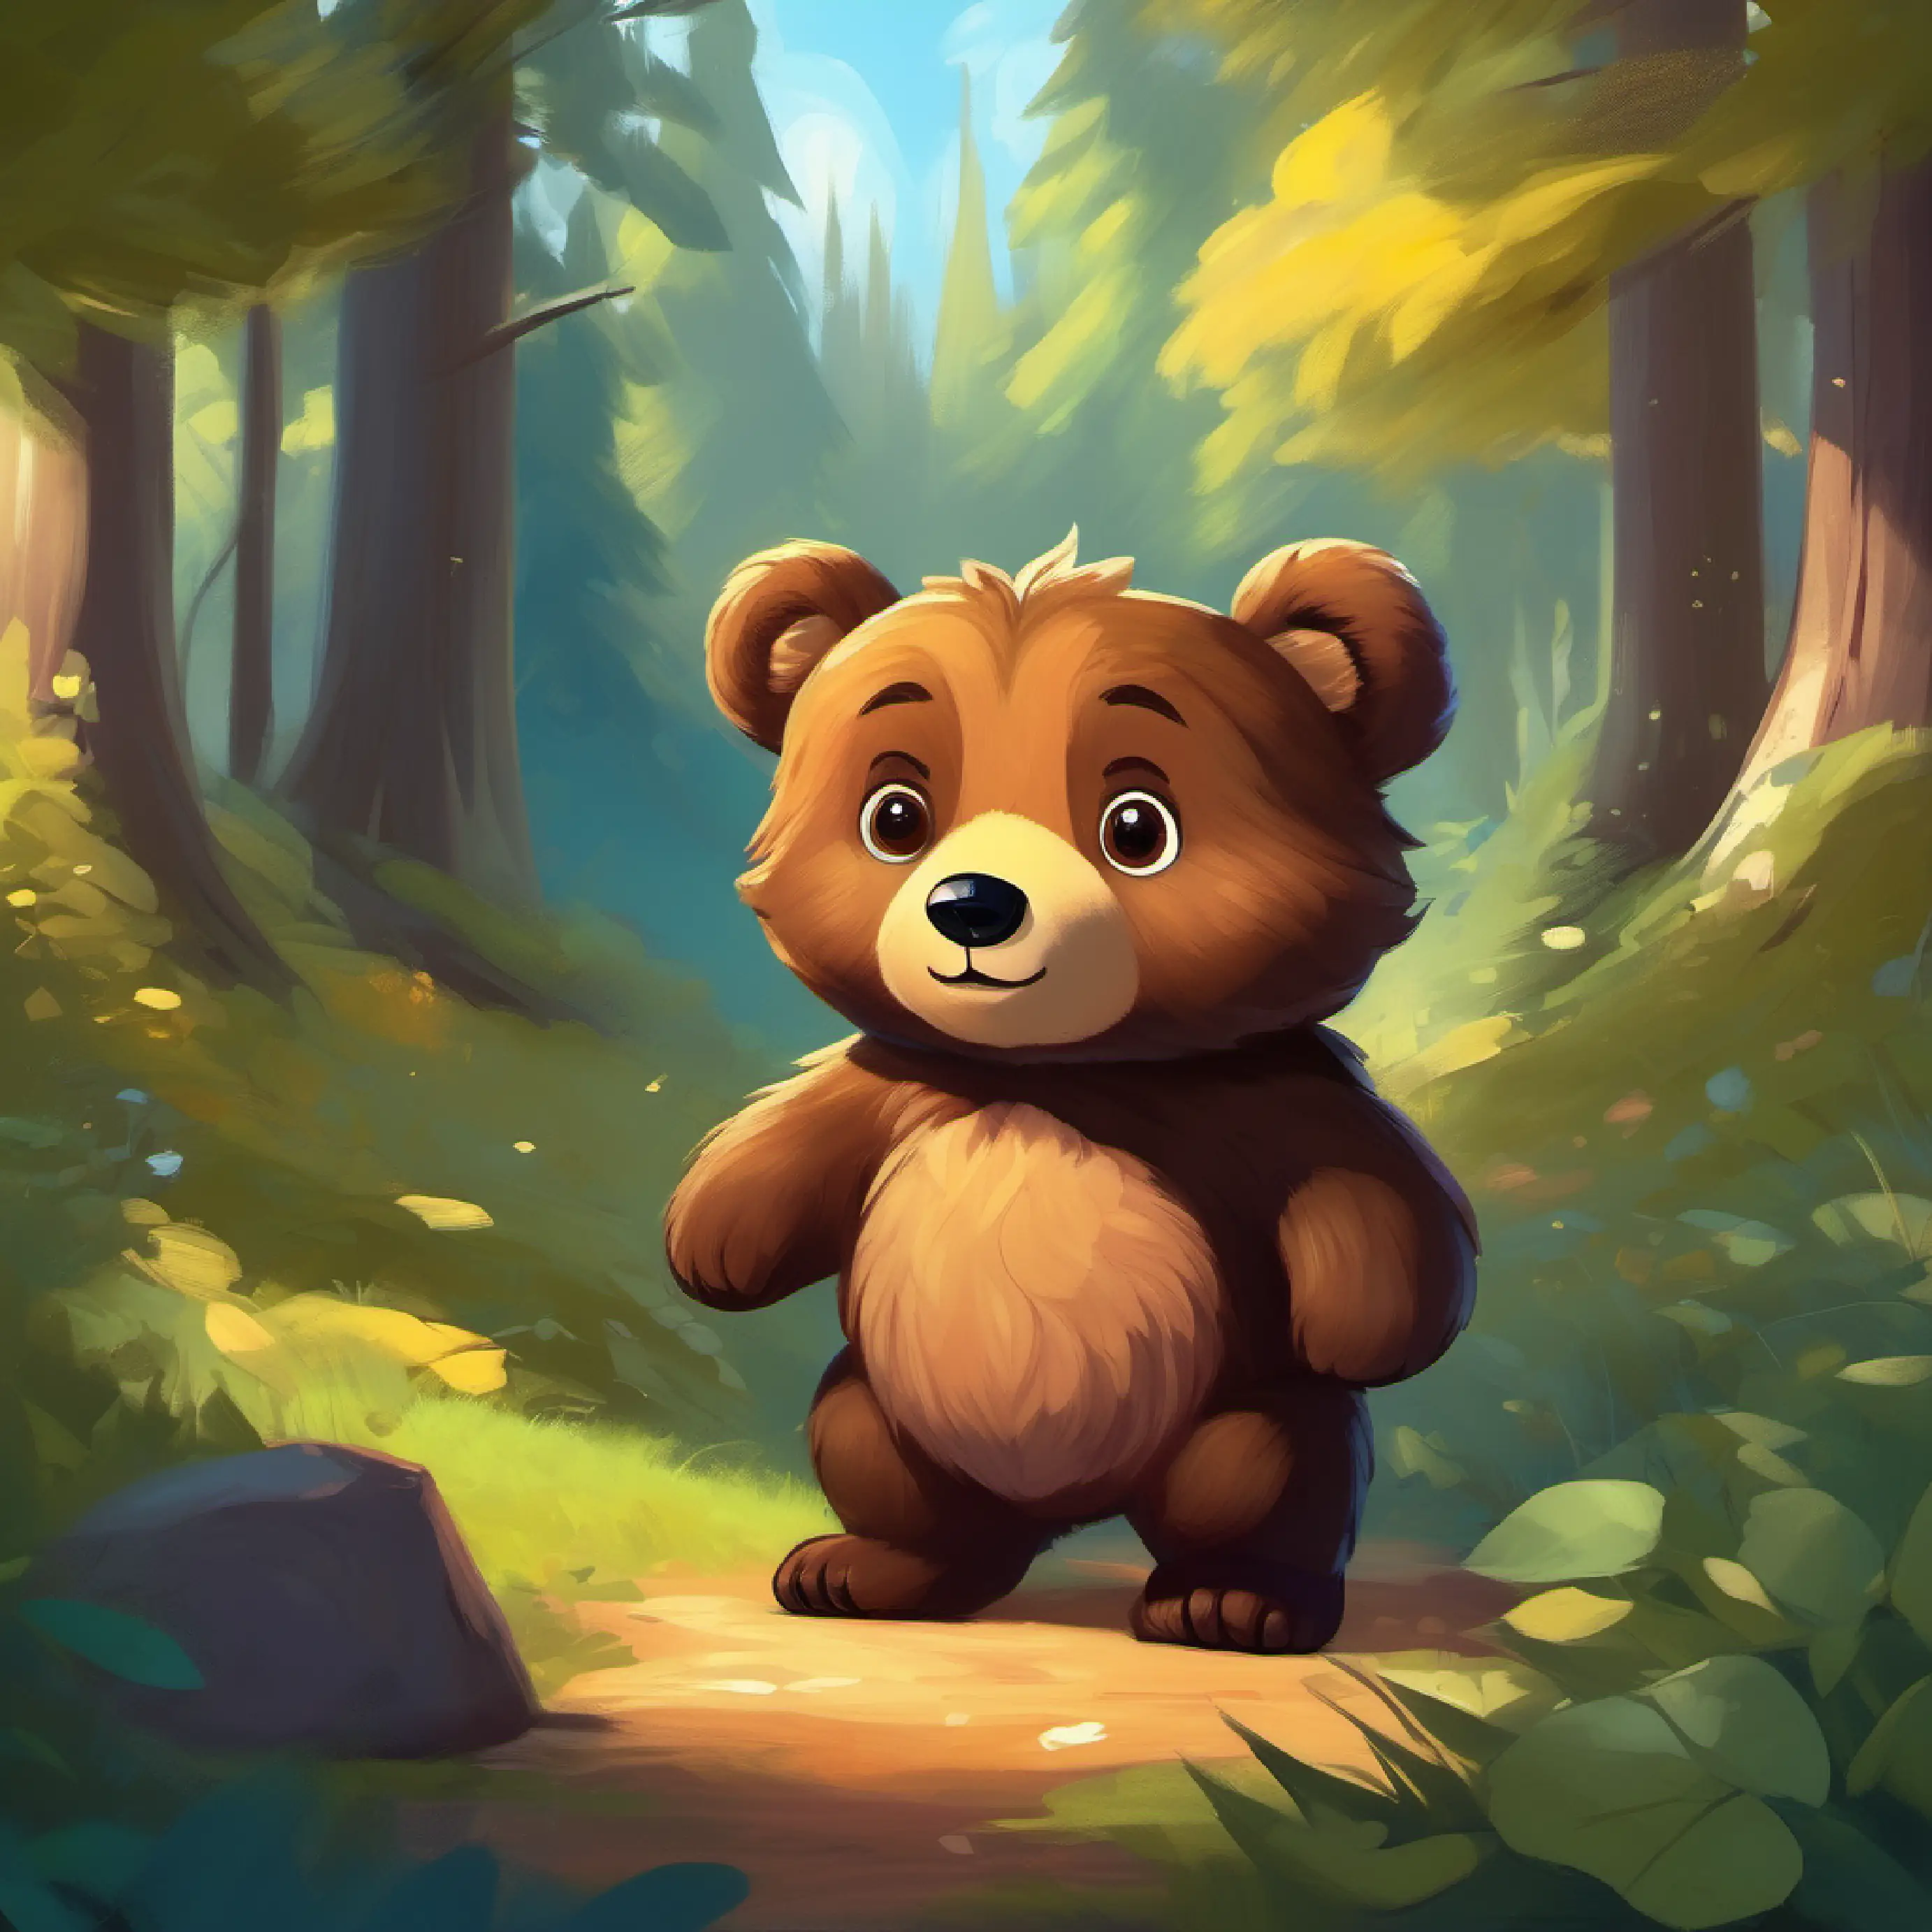 Introducing A small bear with fluffy brown fur and bright, curious eyes, the little bear, in his home forest.